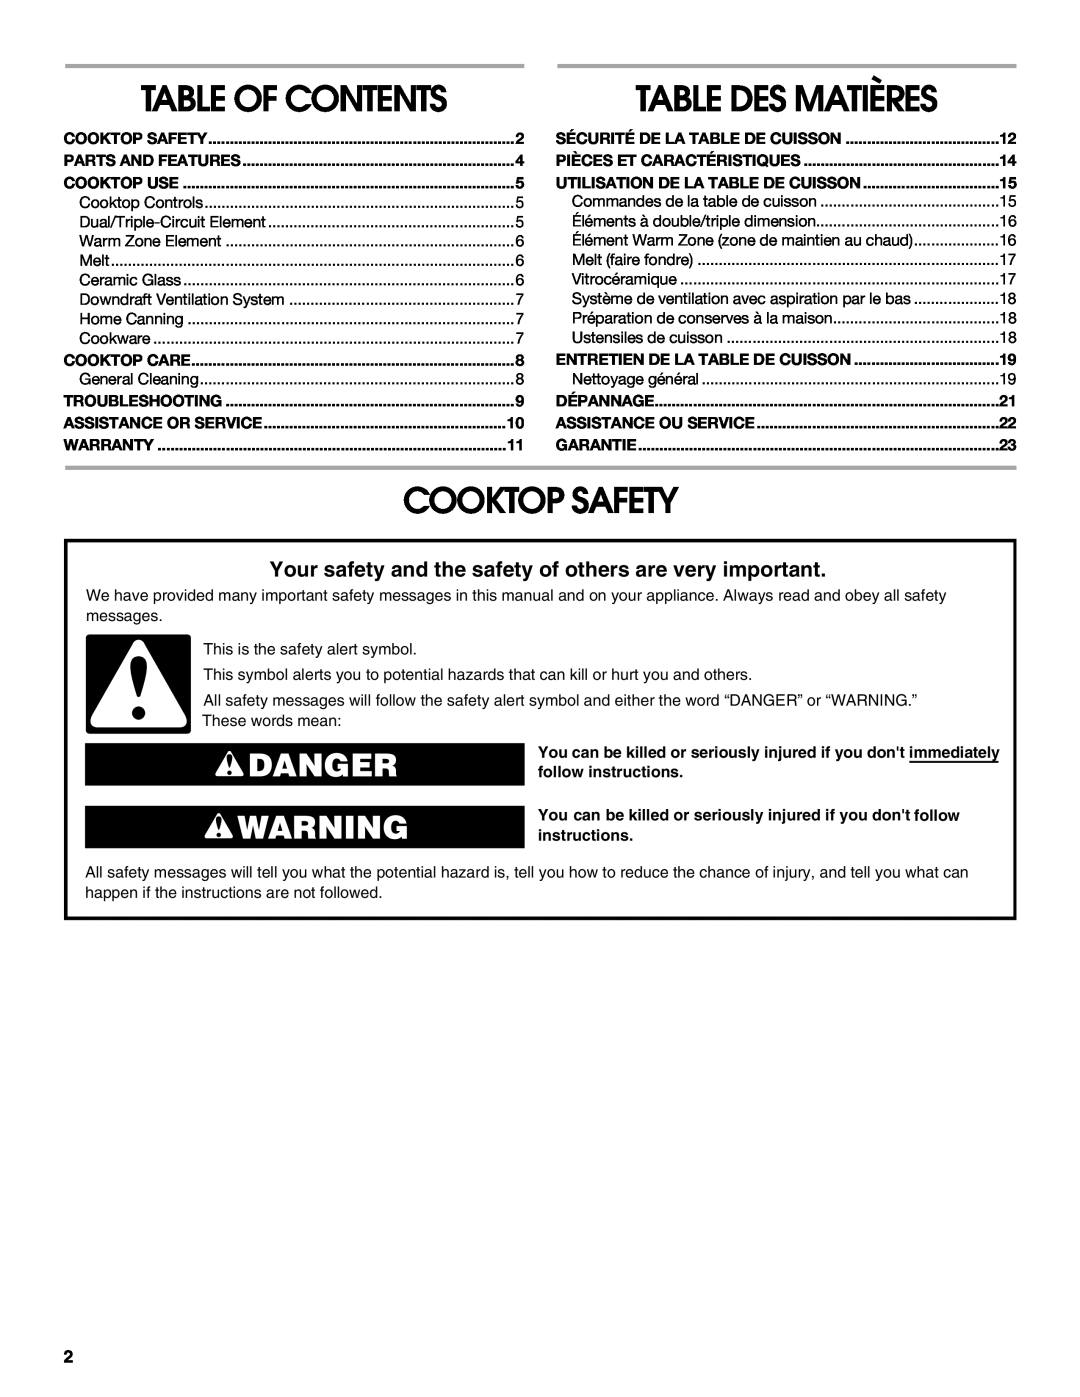 Jenn-Air W10197056B manual Table Of Contents, Cooktop Safety, Danger, Table Des Matières 